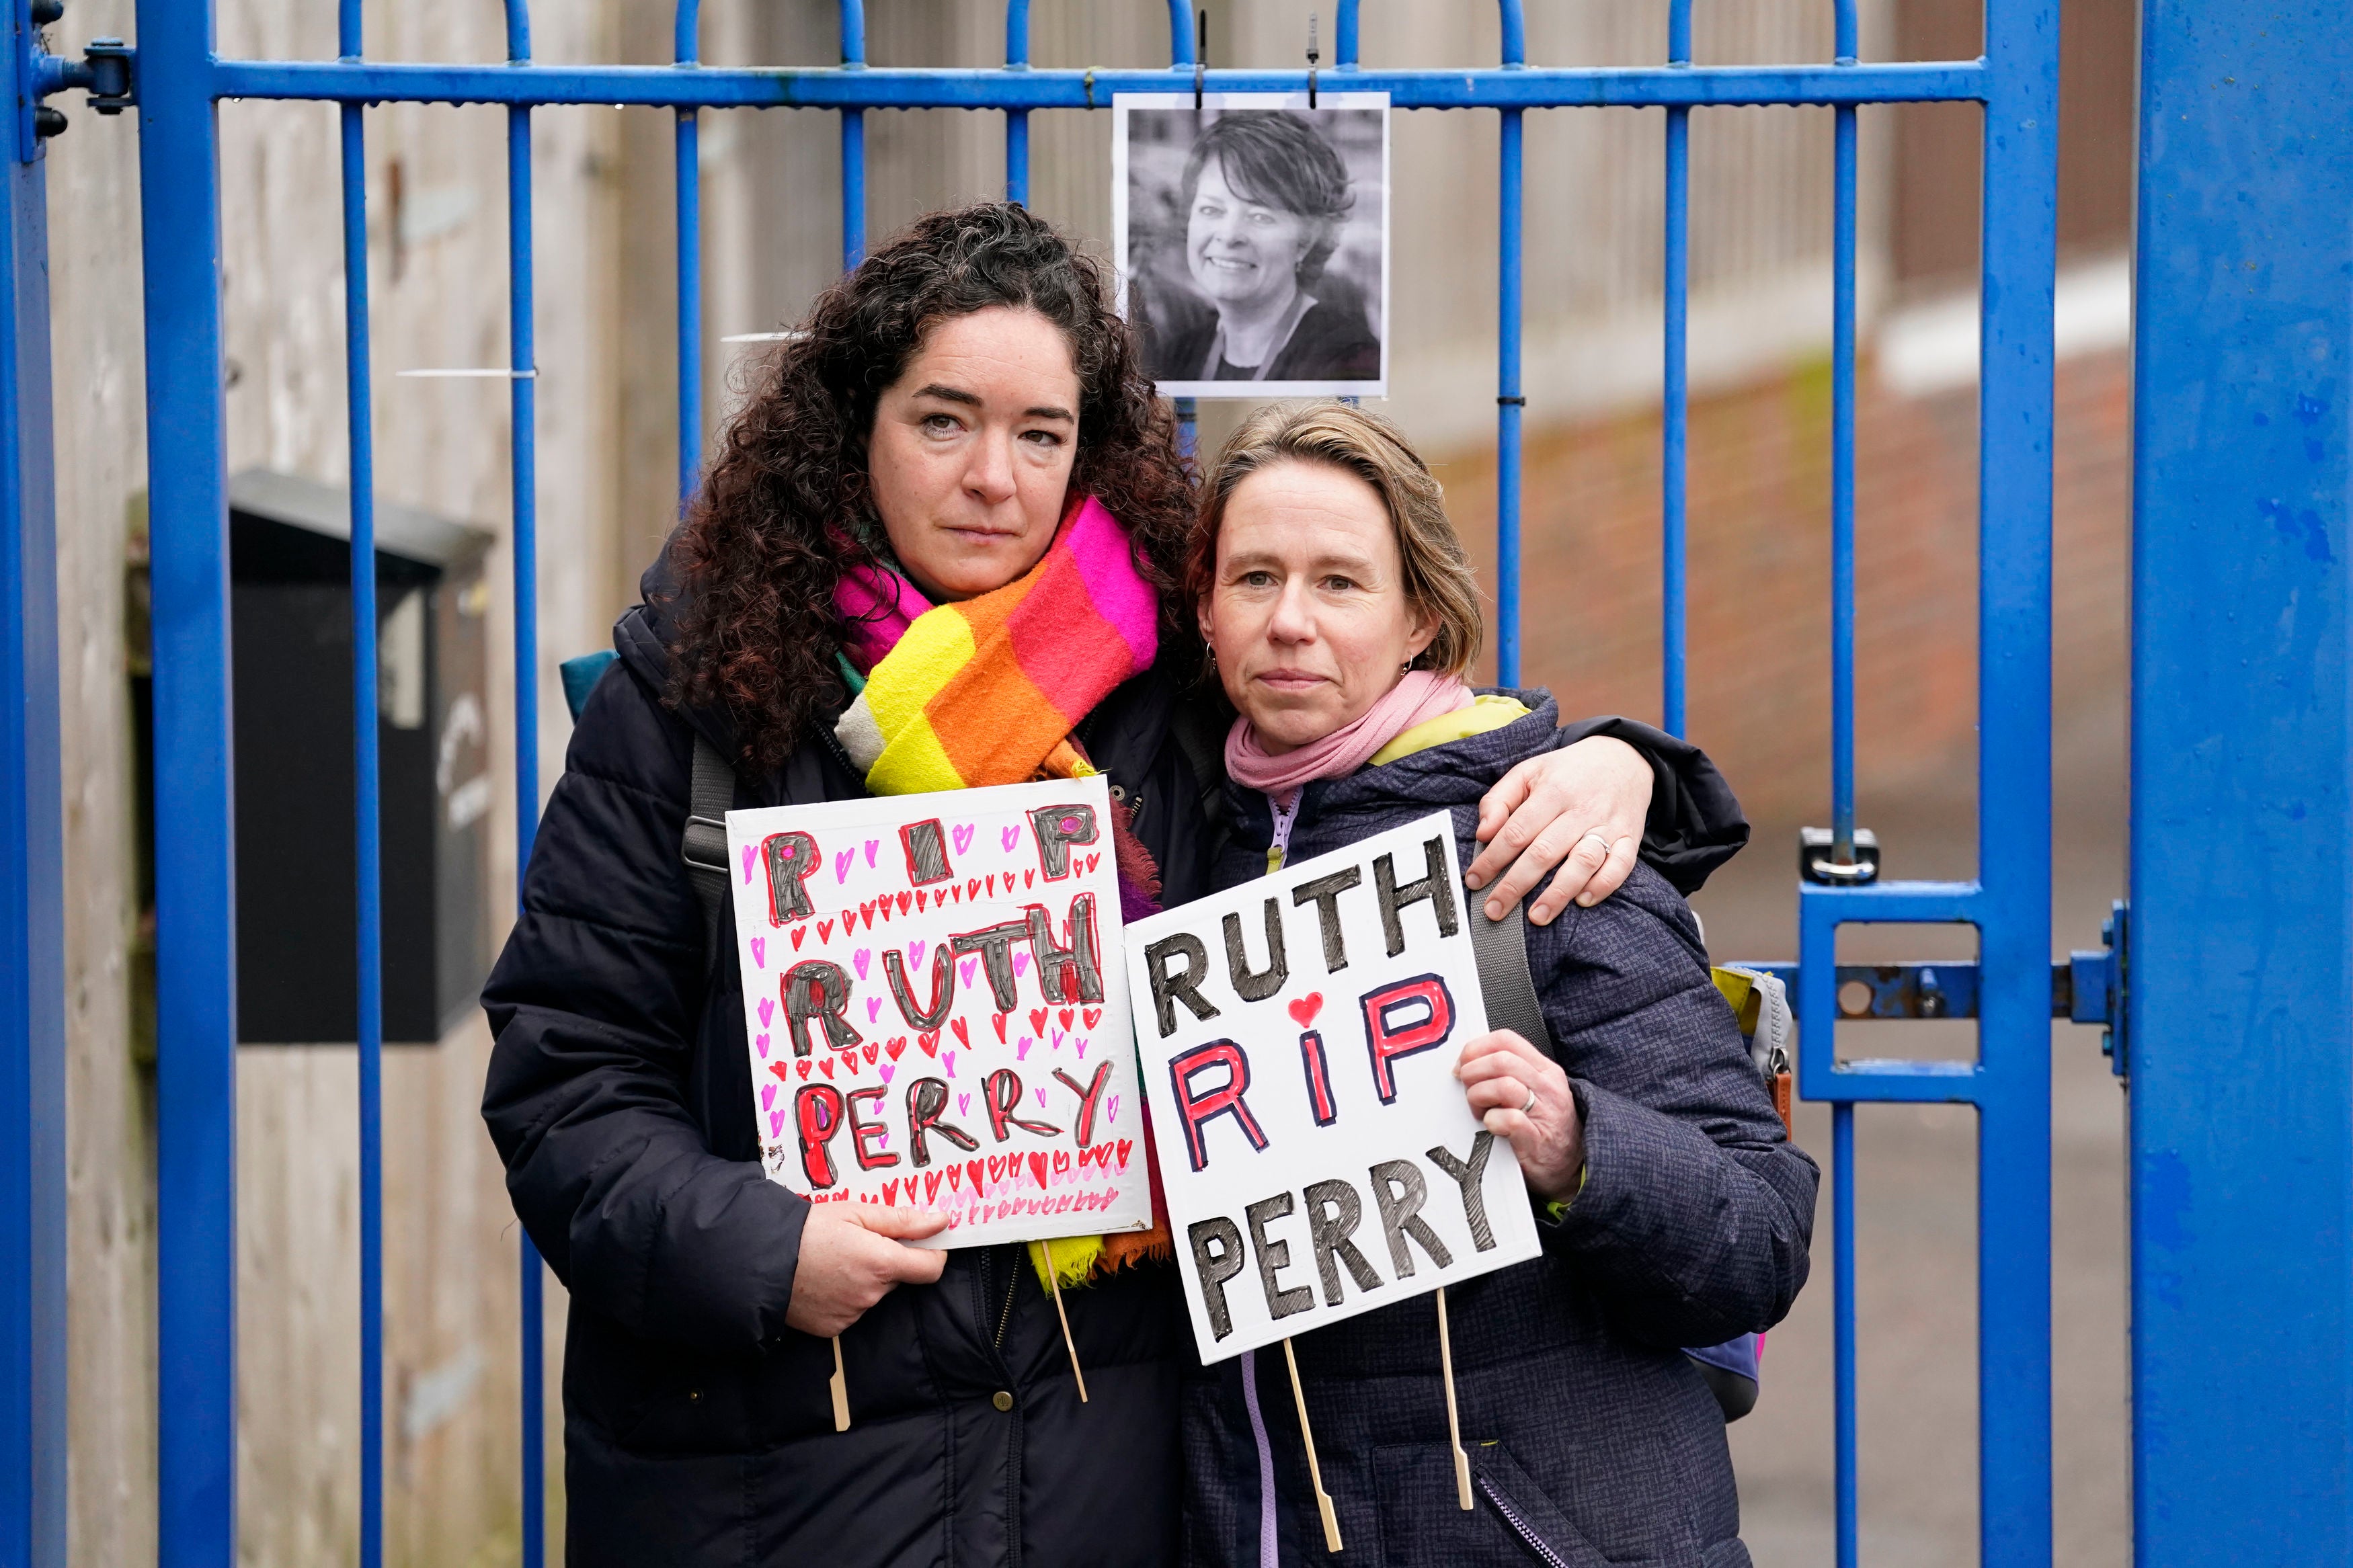 Two demonstrators mourn Ruth Perry outside the gates to John Rankin Schools in Newbury, Berkshire